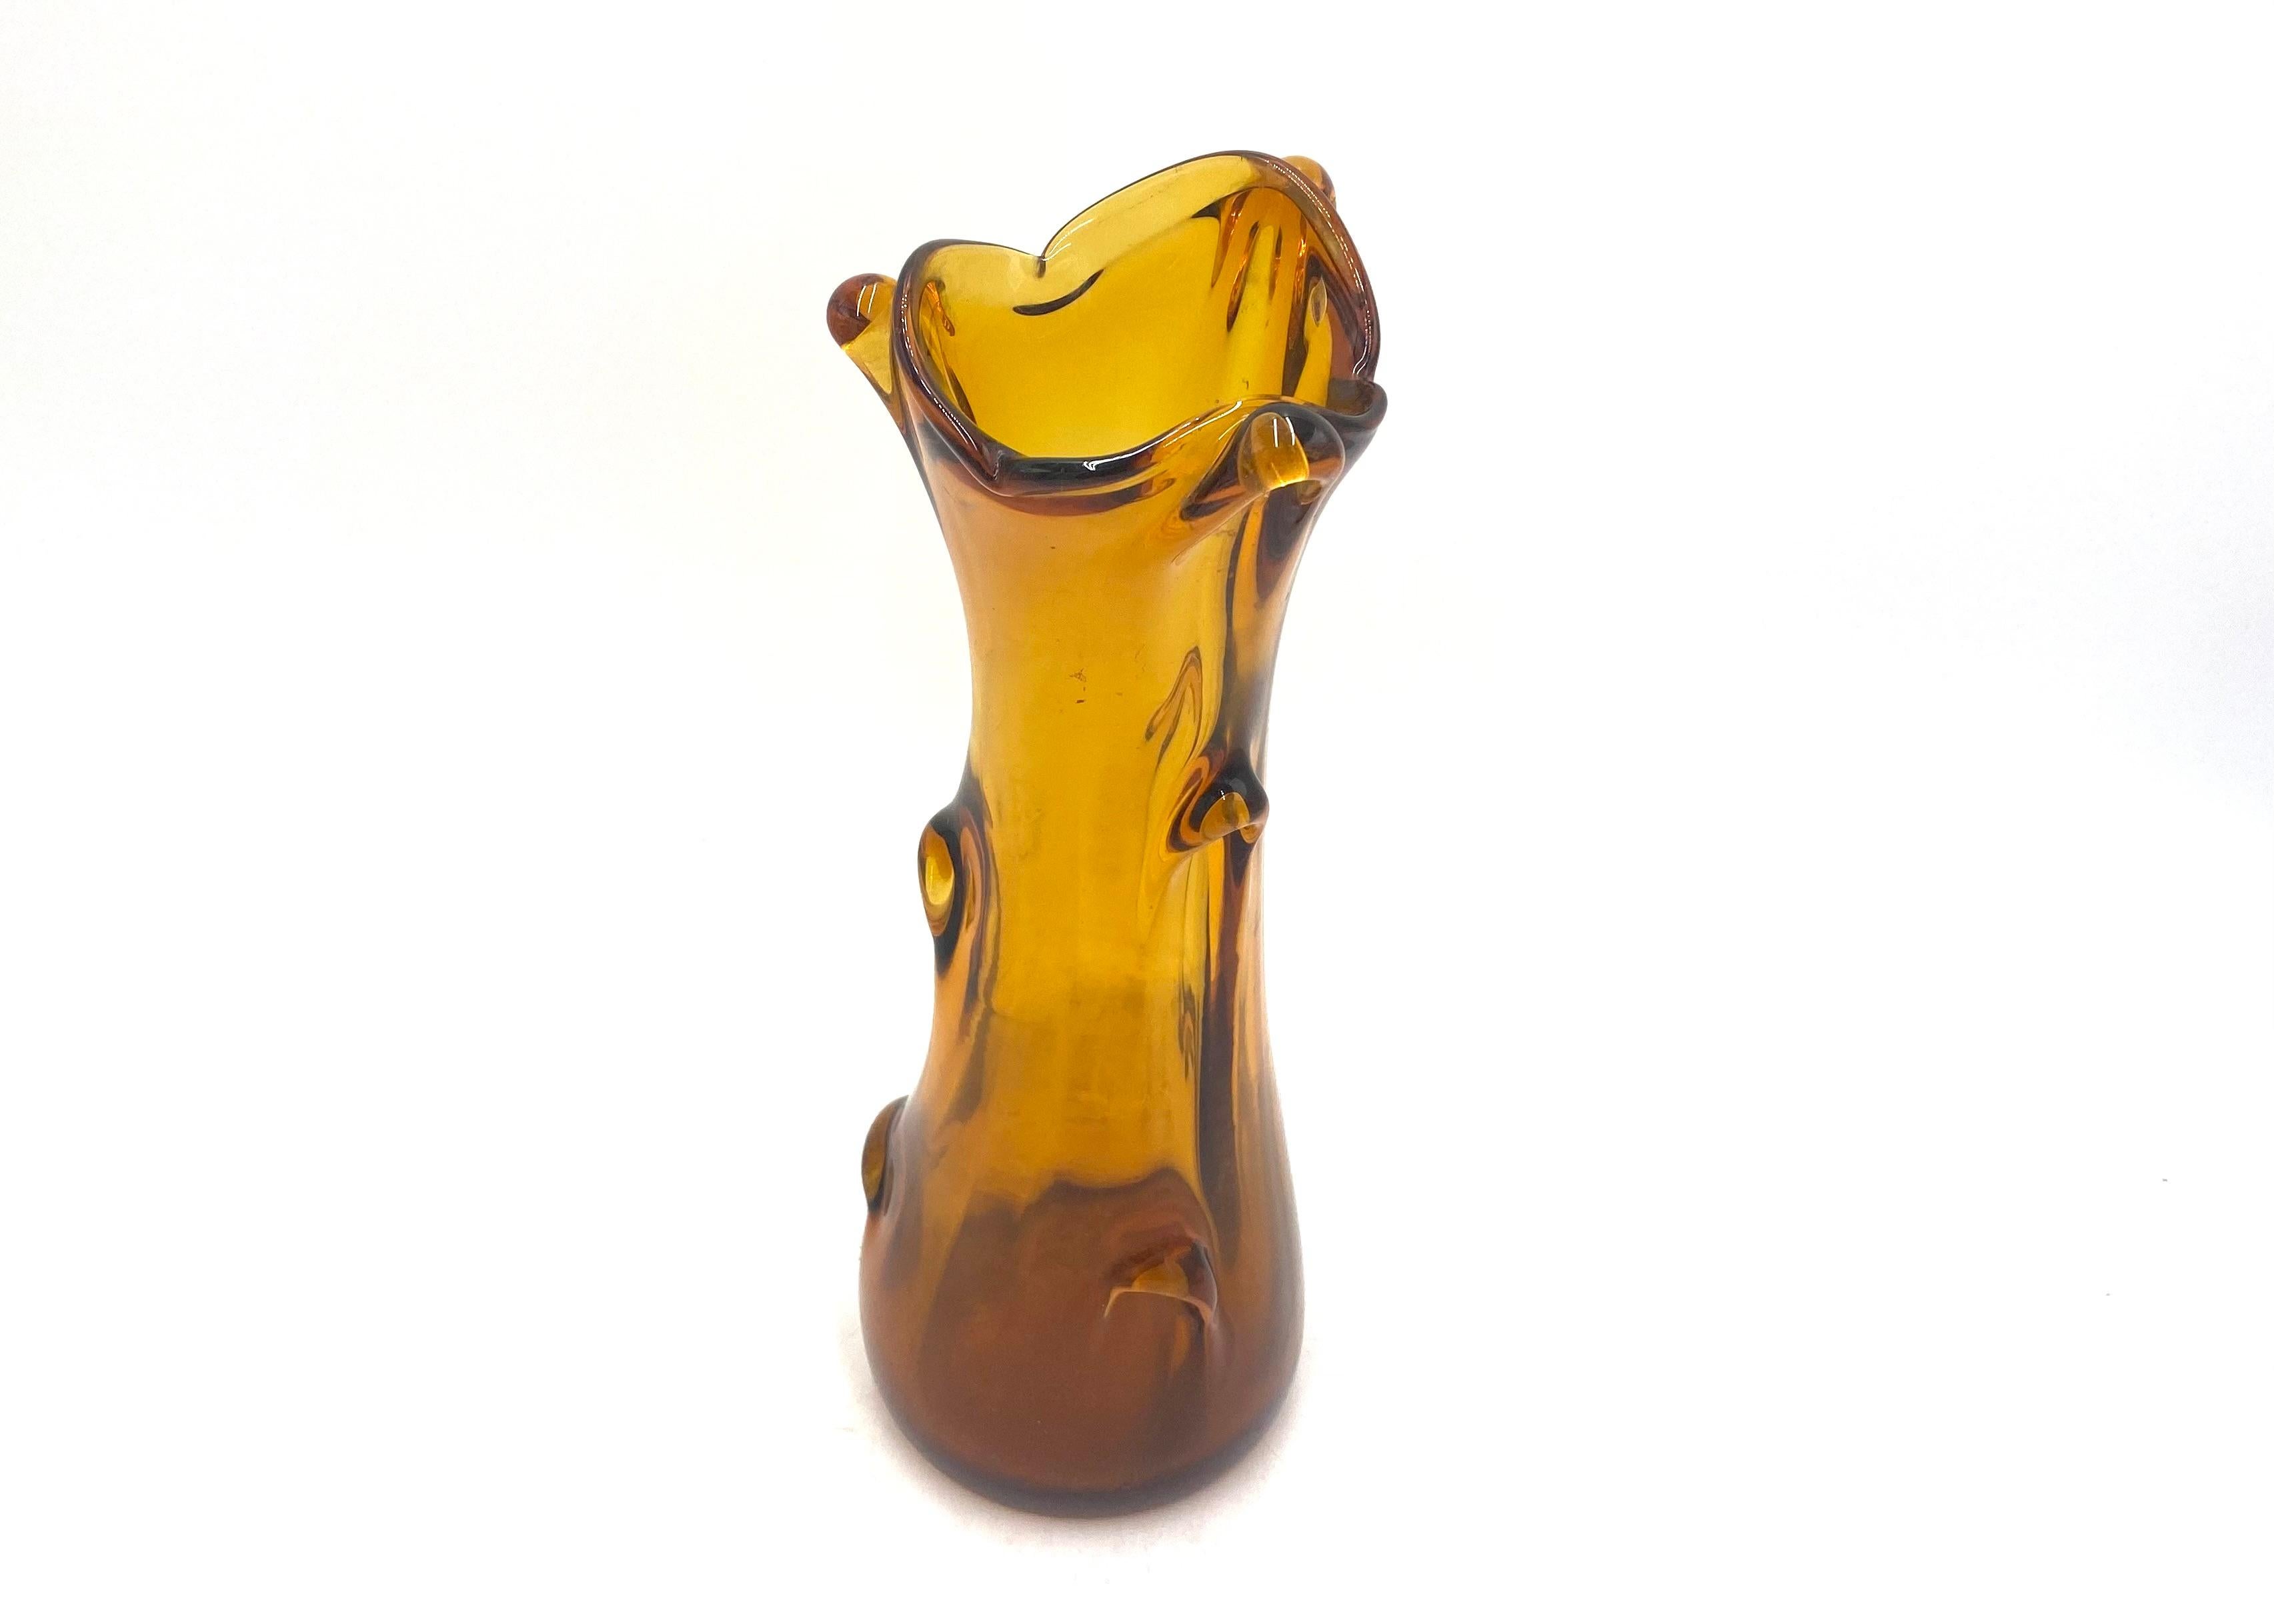 Amber glass vase.
Manufactured by HSG 